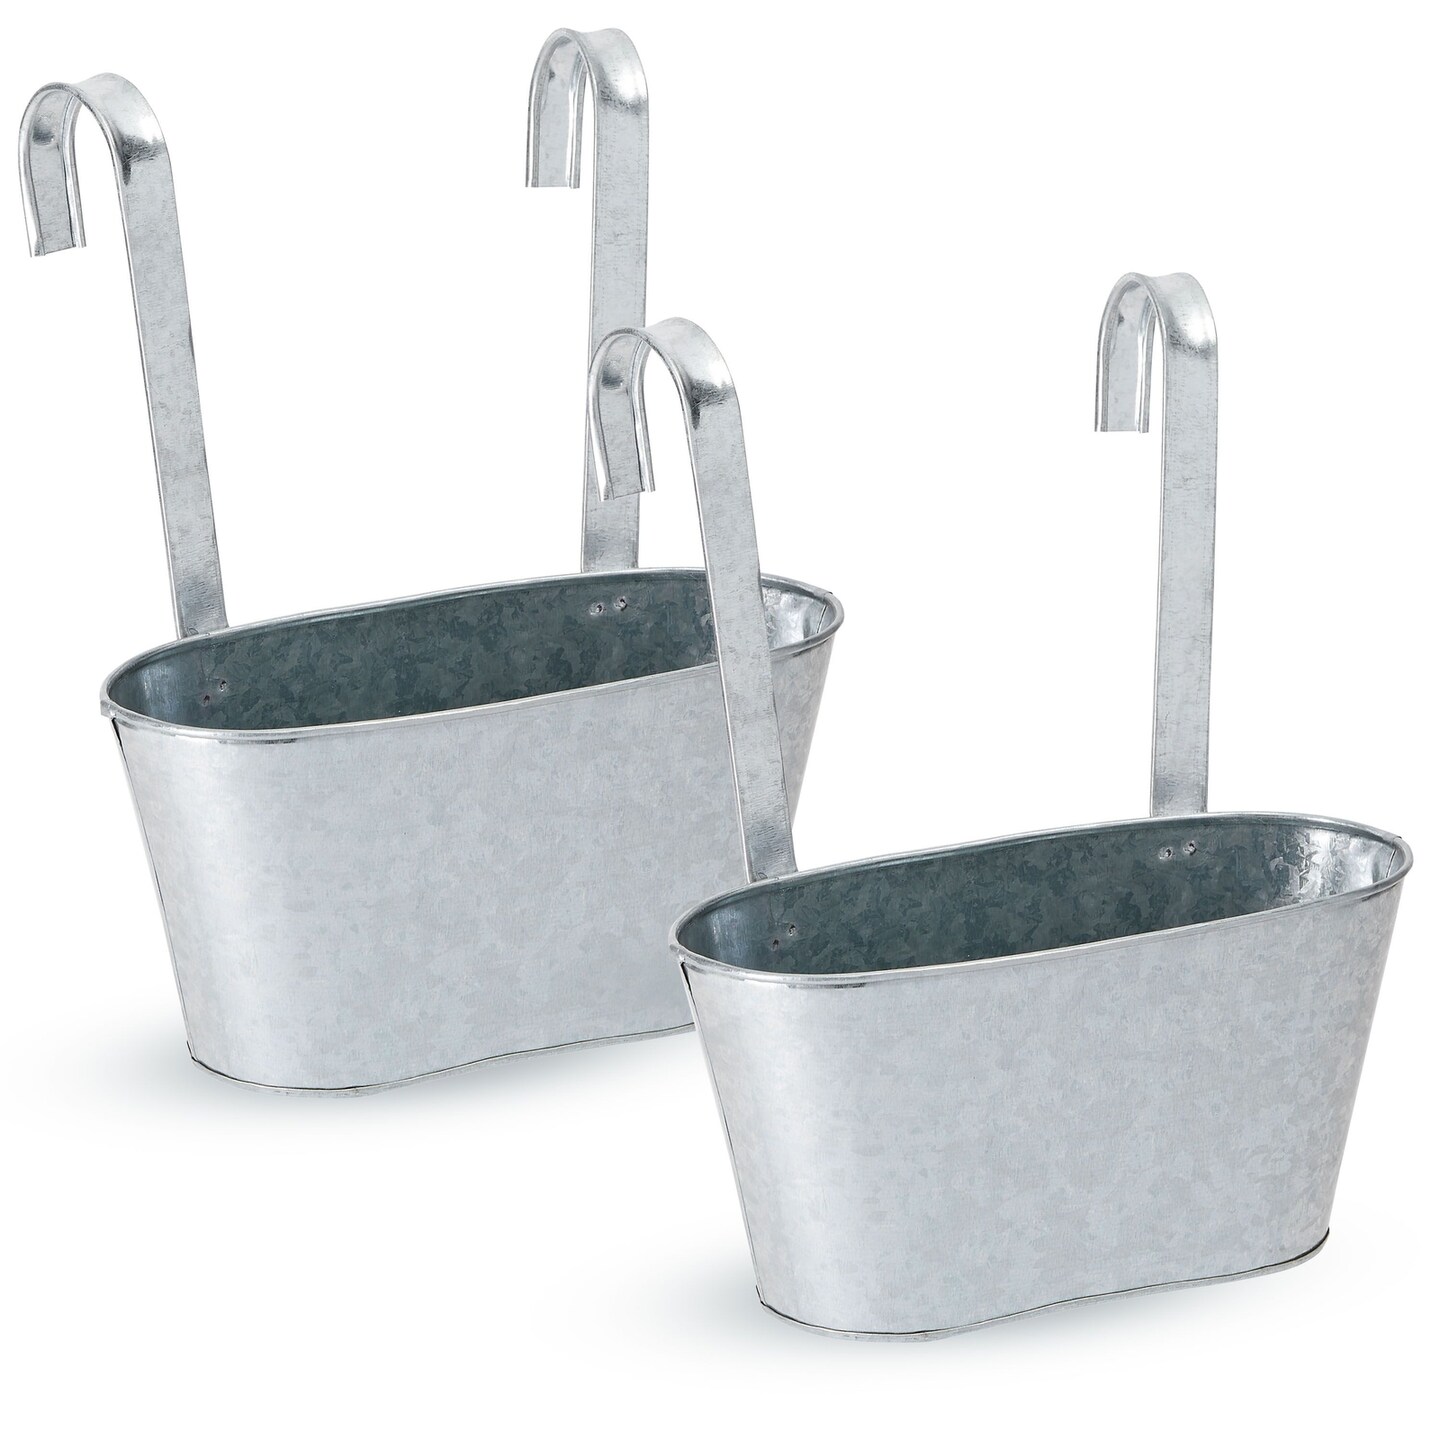 2 Pack Large Galvanized Metal Hanging Bucket Planter Flower Pots for Railing, Fence, Balcony, Wall Decor, and Garden, Indoors and Outdoors (5 x 4.5 x 10 Inches)